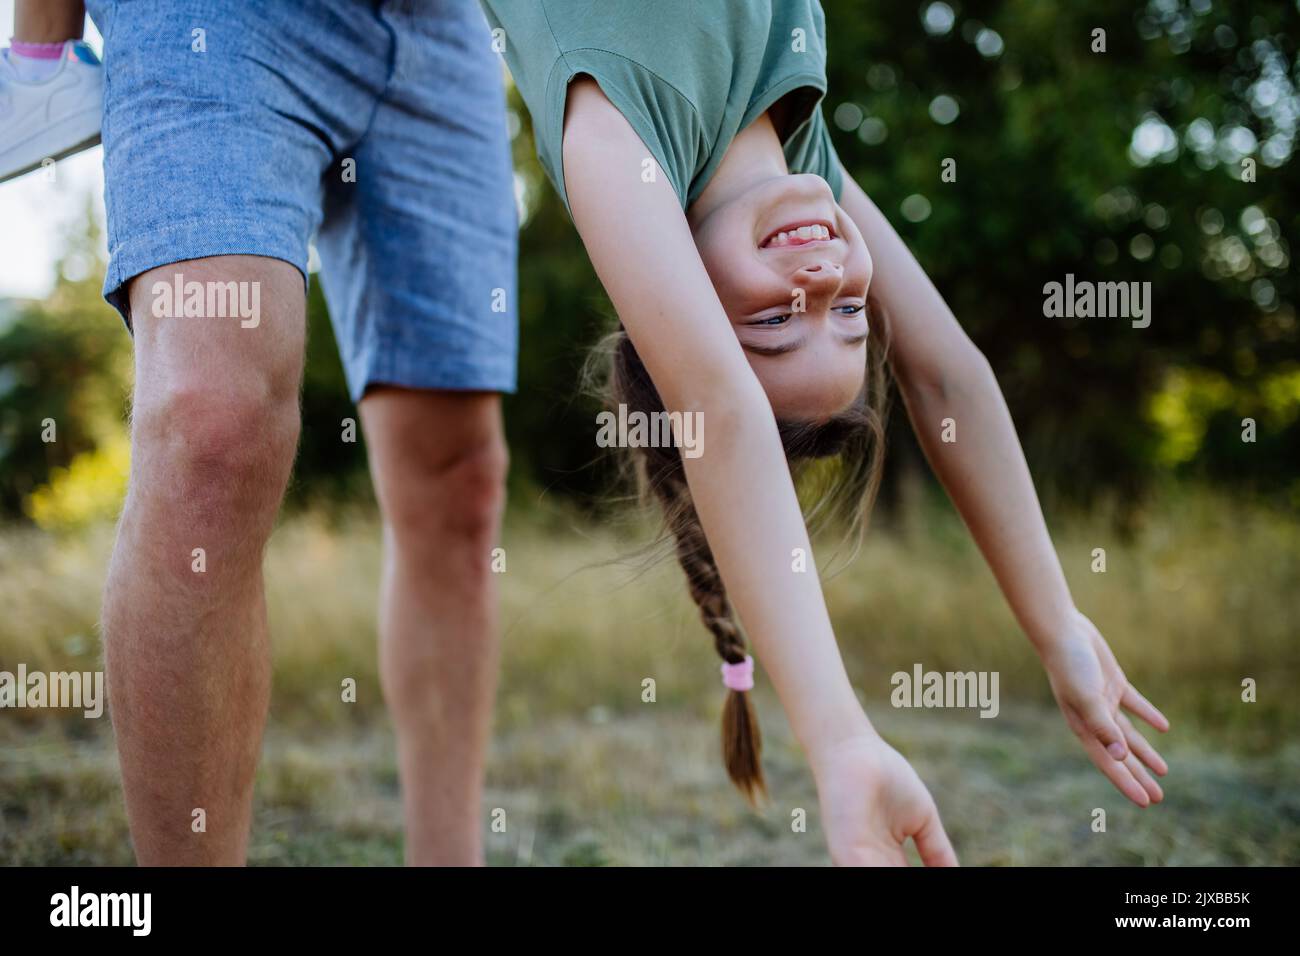 Father swing her daughter, holding her upside down, having fun together in nature. Stock Photo